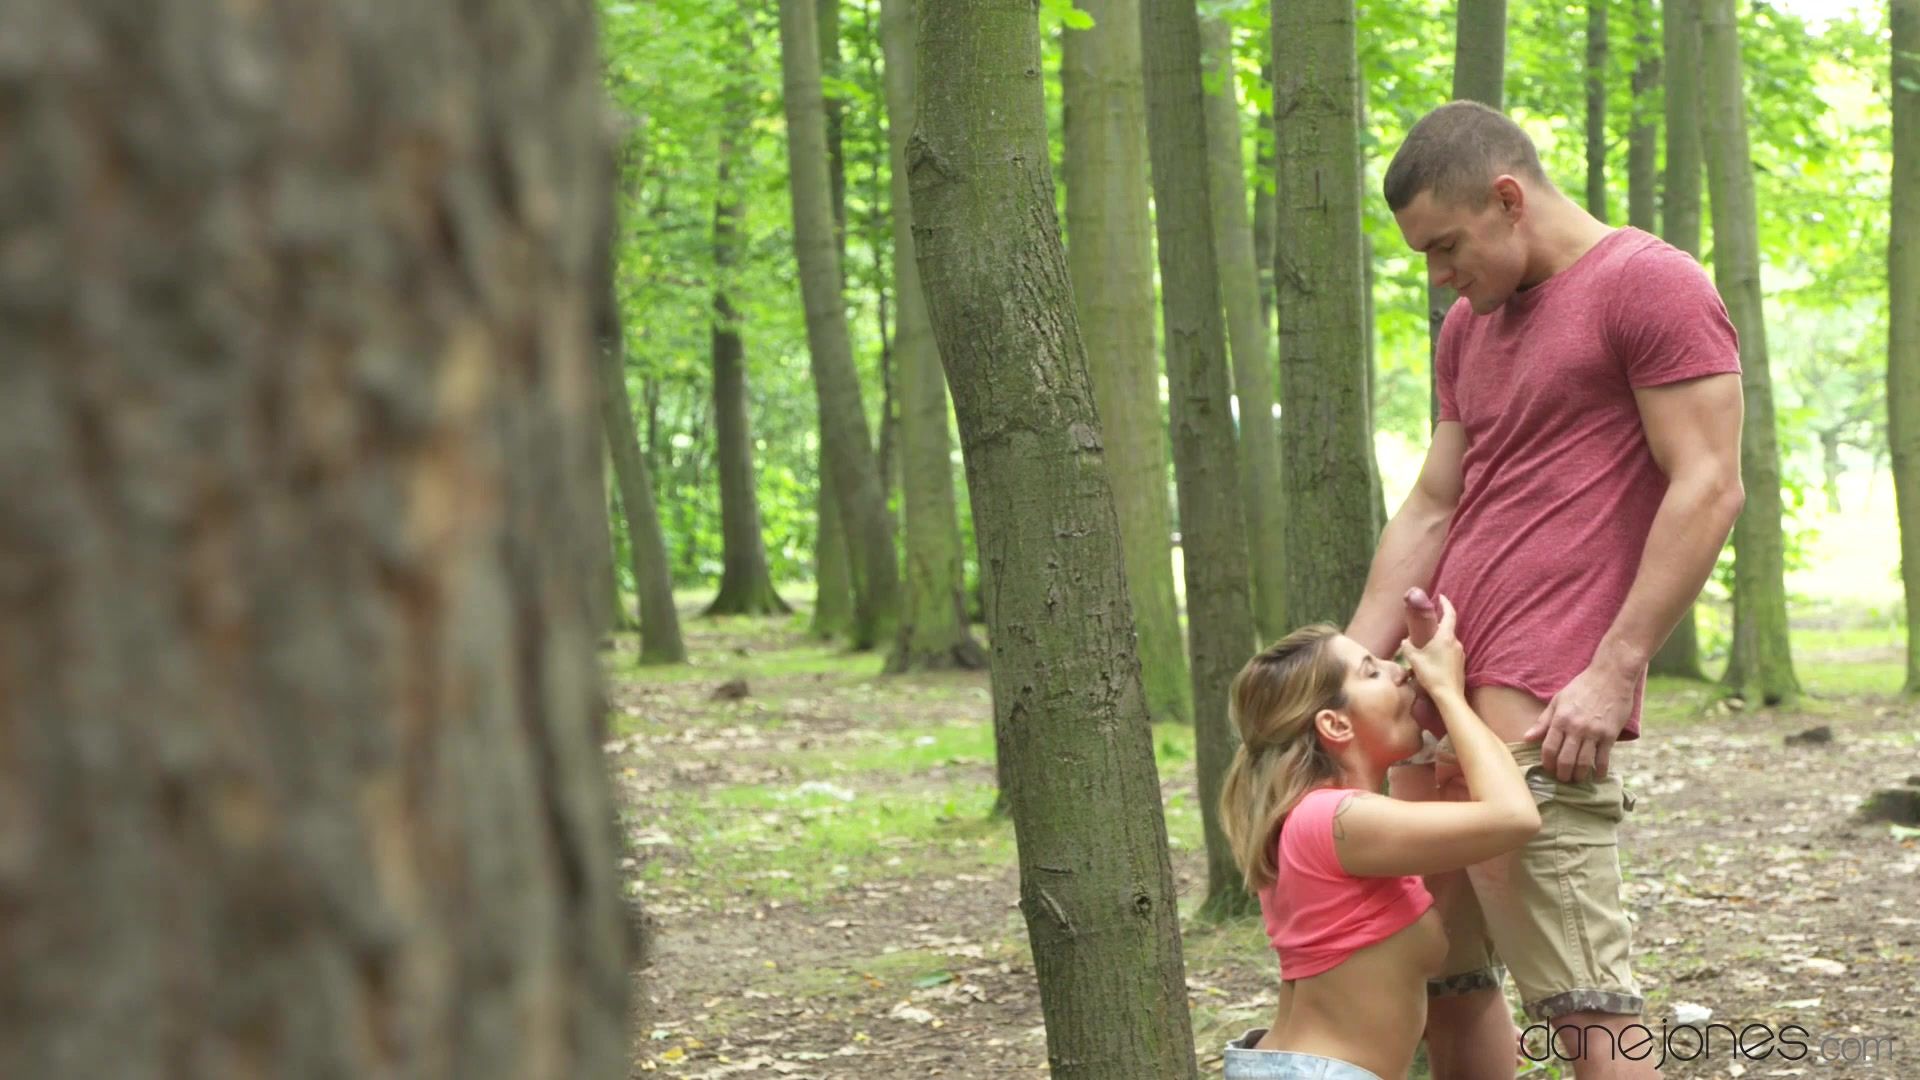 Supermen Teen Amy Red sucks a dick and takes a pounding in the woods Missionary Position Porn